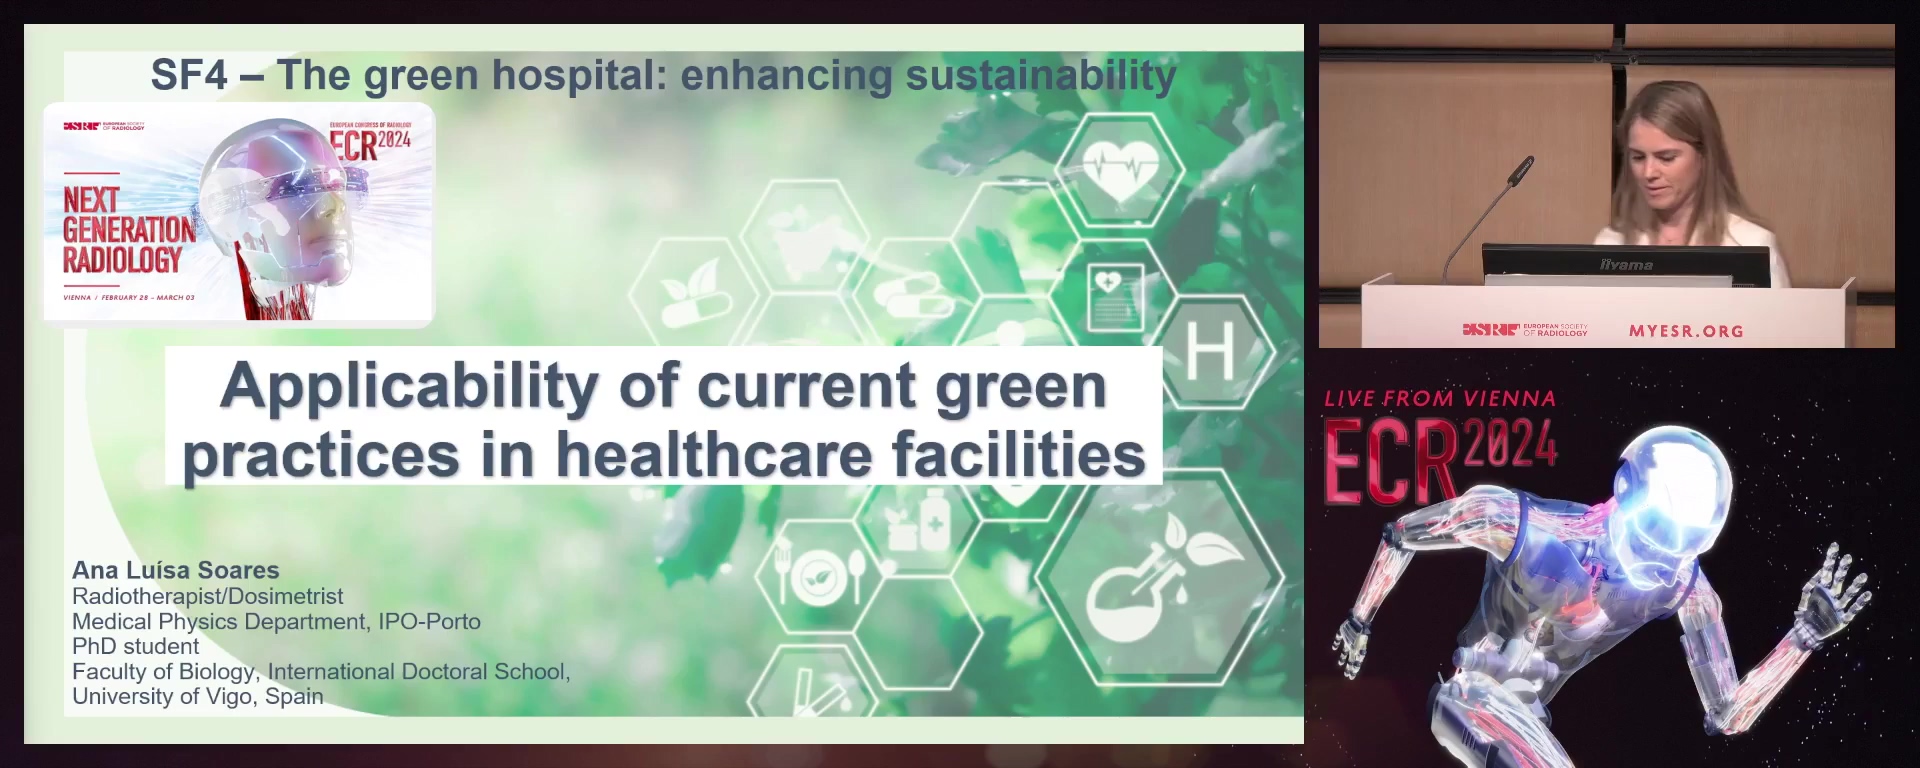 Applicability of current green practices in healthcare facilities